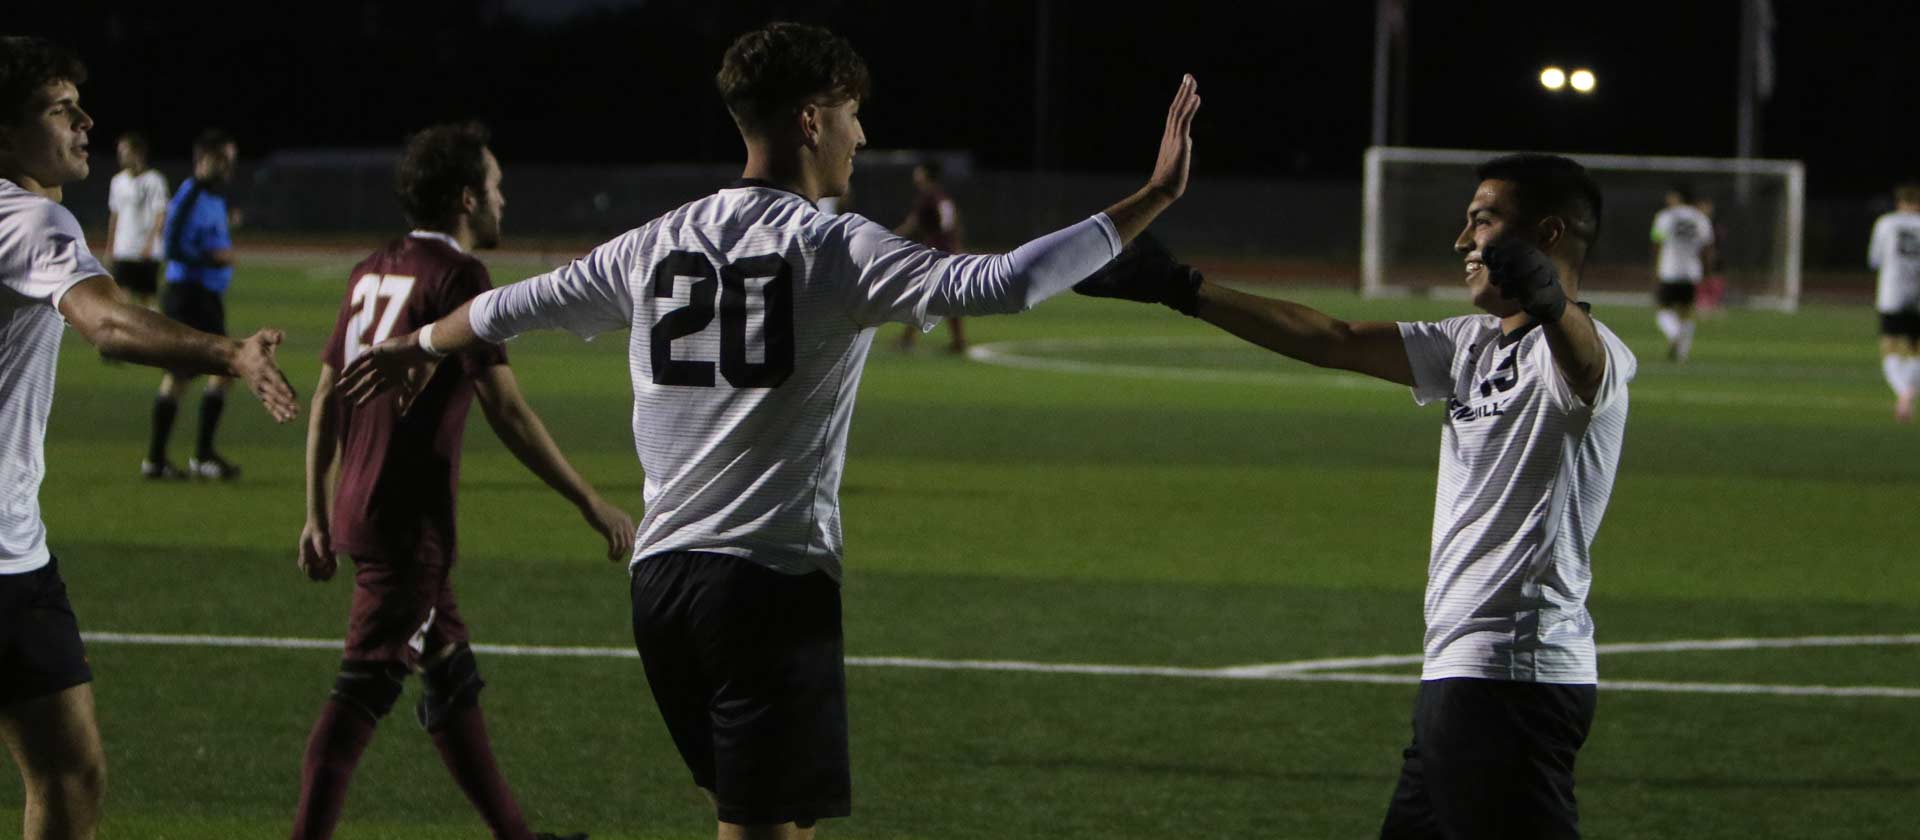 Men's soccer led by surge of five goals in second half of 7-1 win against Eureka